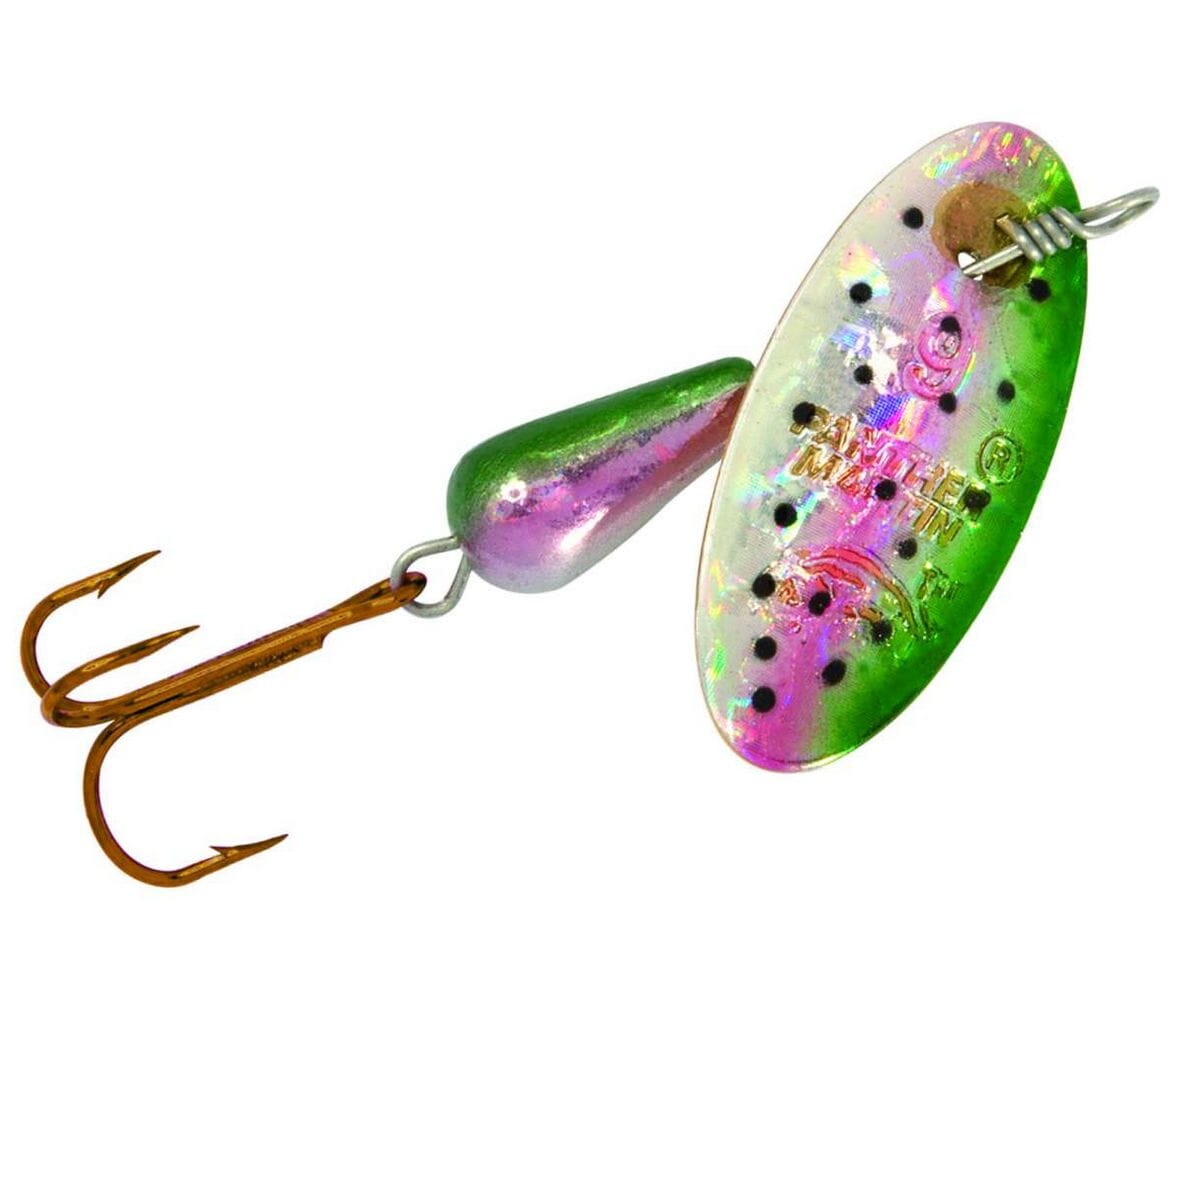 Buy Panther Martin Rainbow Trout with Fly (1/32 oz.) Online at